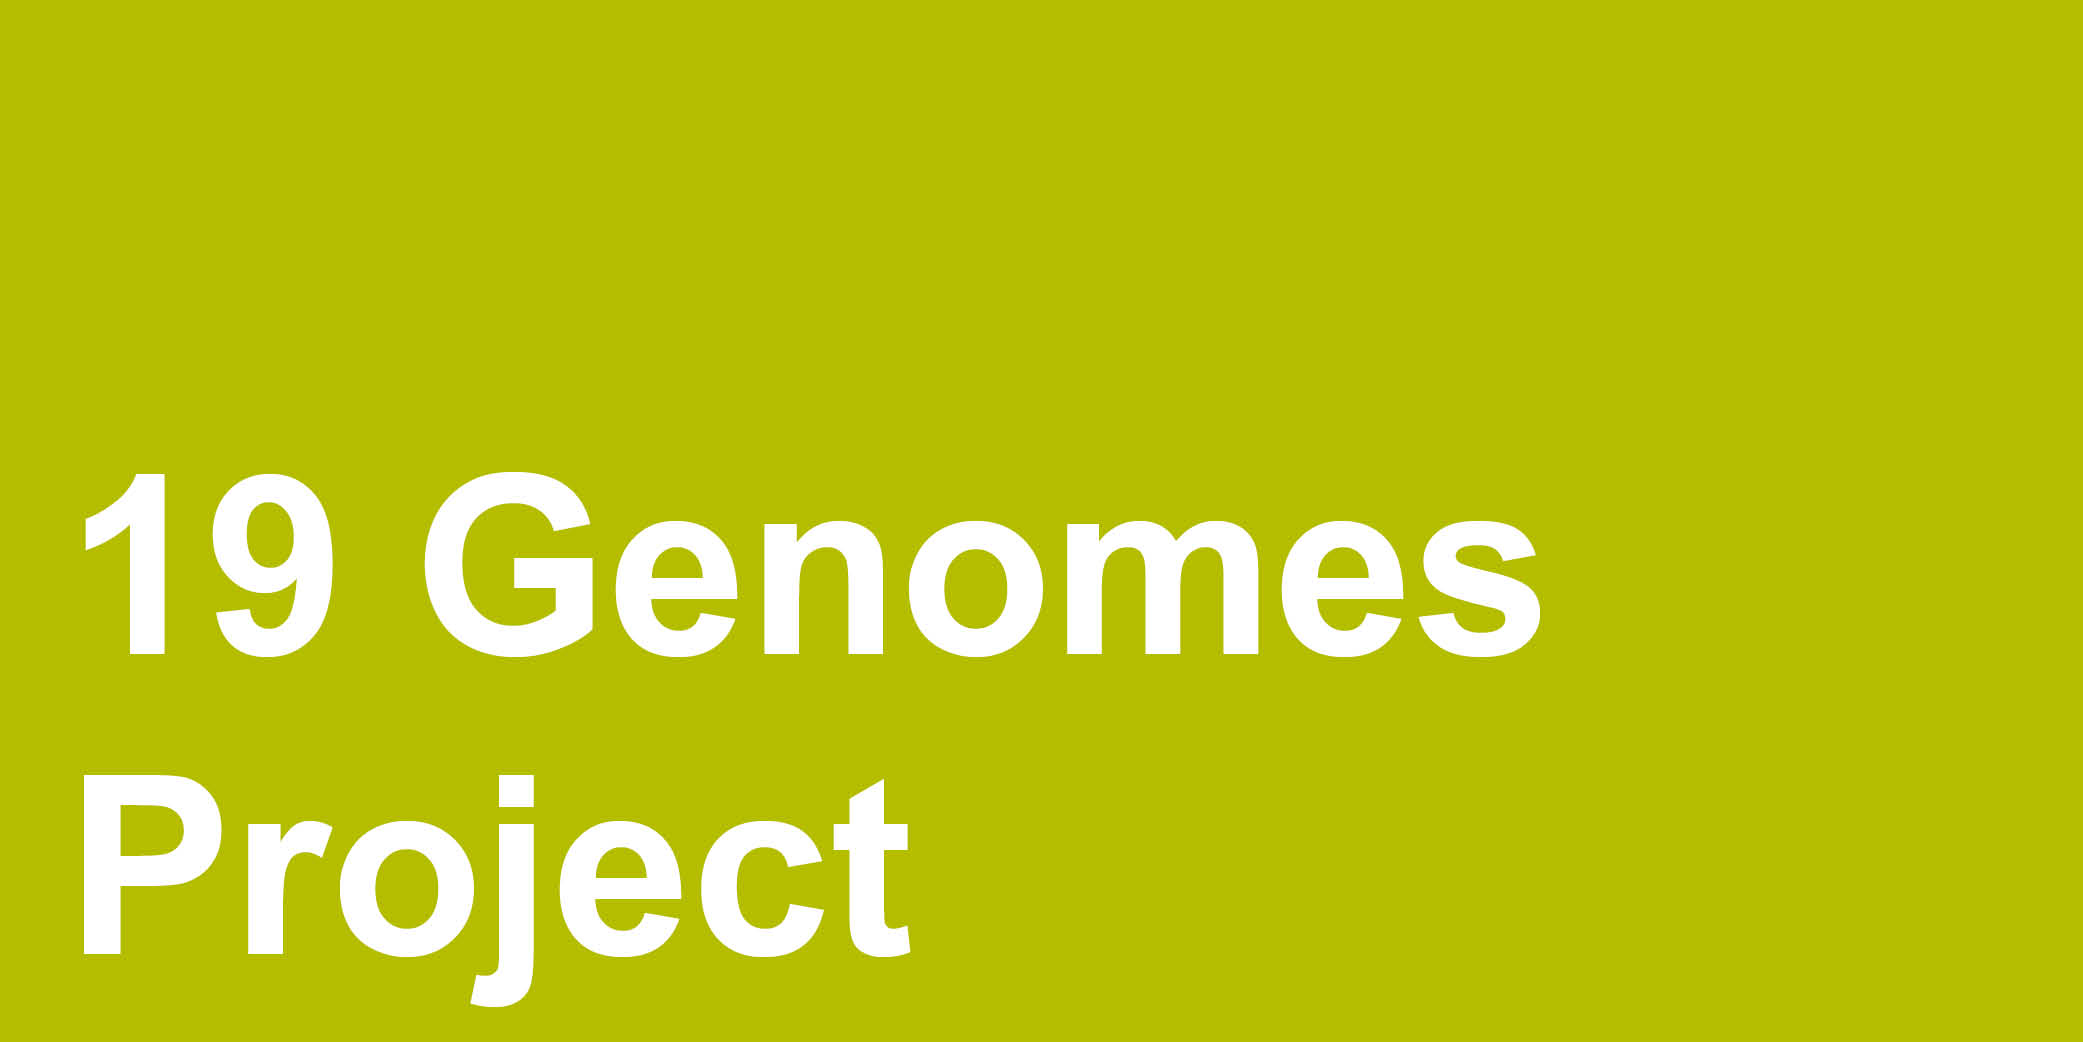 19 Genomes Project